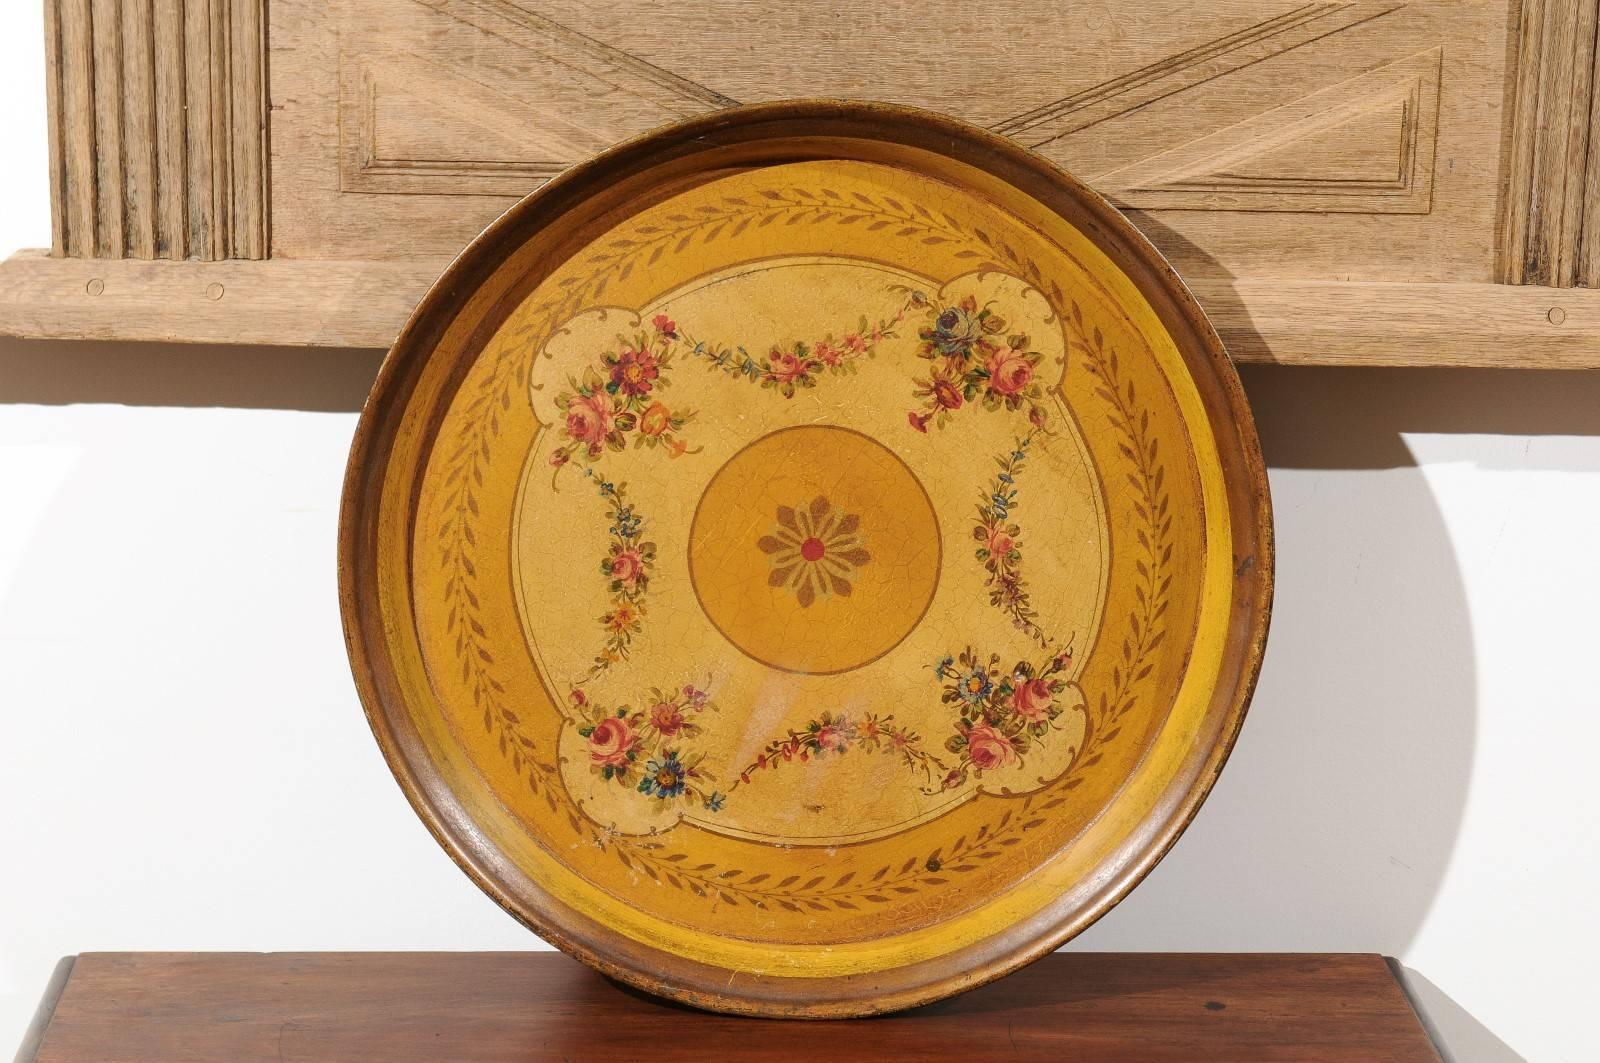 A French round painted tole tray with floral motifs from the 19th century. This French circular tole tray is adorned on the surround with a delicate foliage motif reminiscent of olive branches. The center is decorated with a stylized floral motif